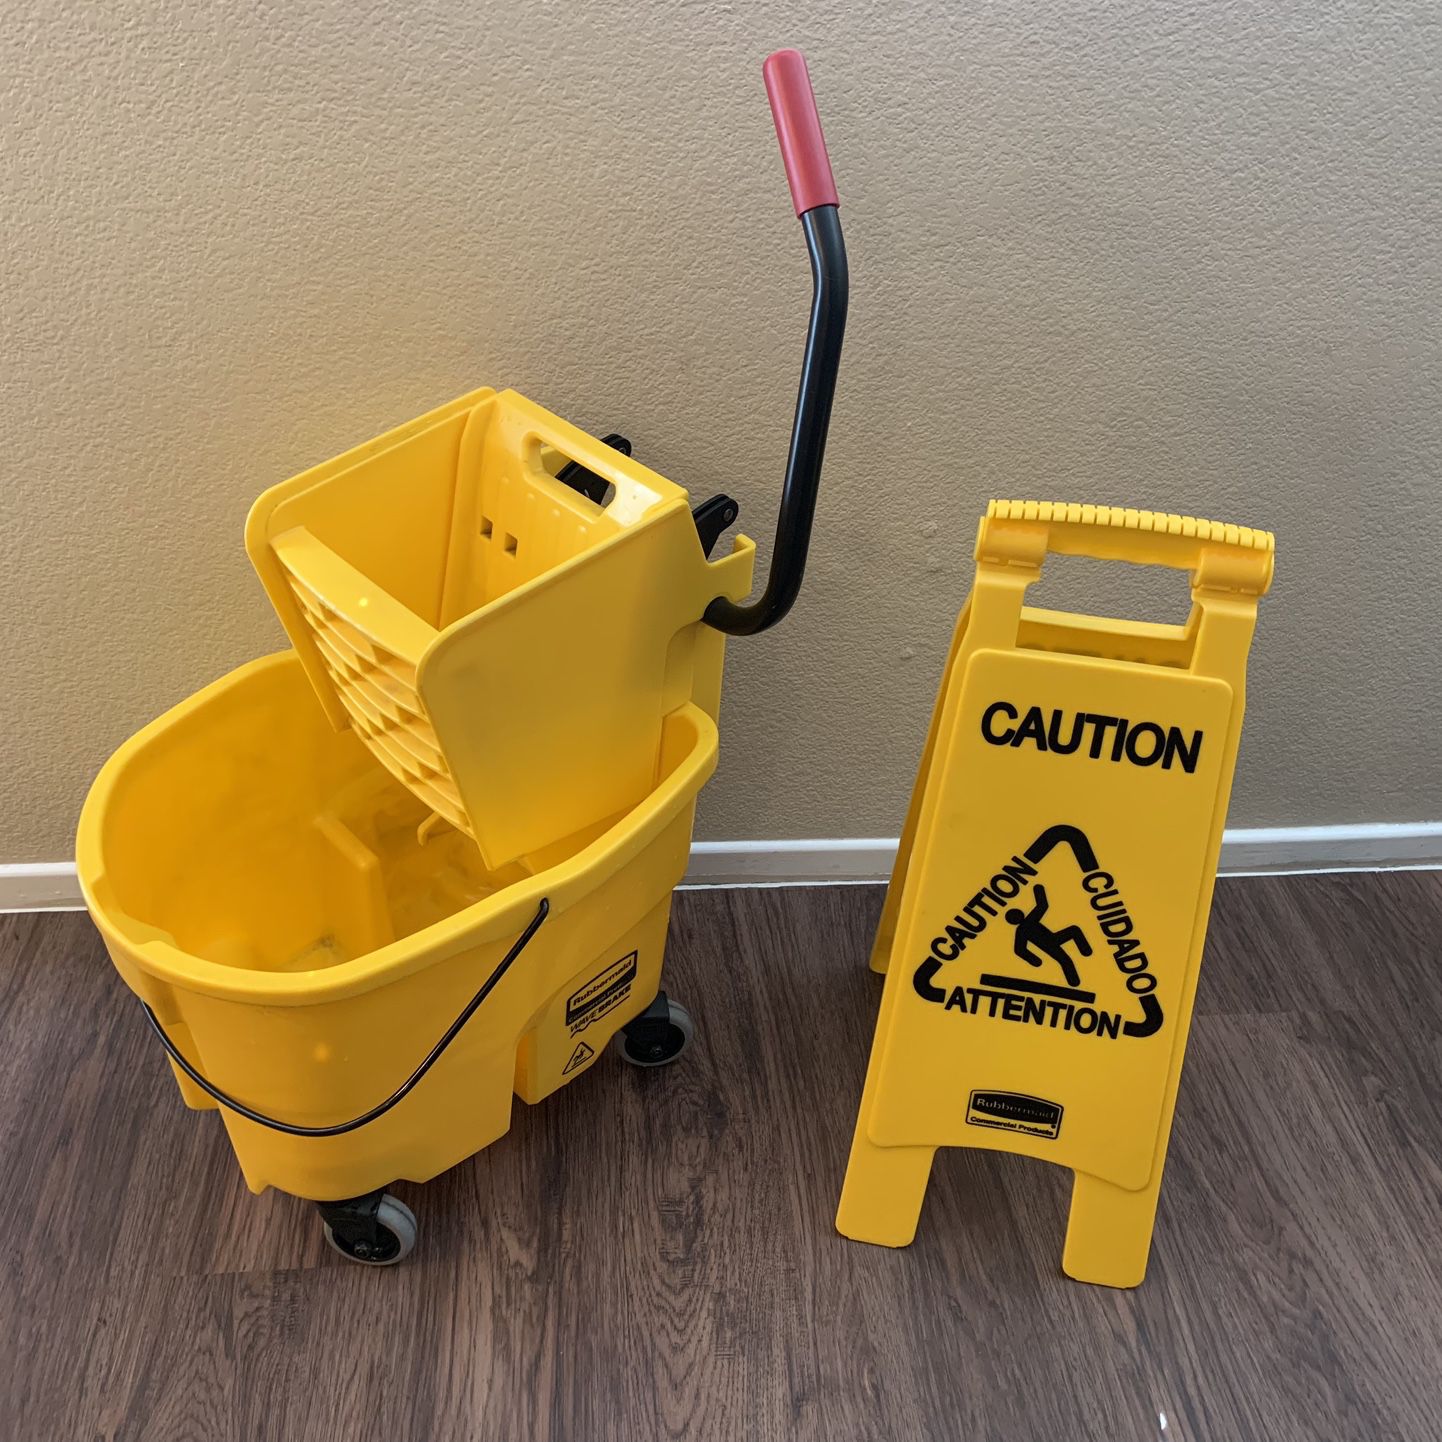 Sold at Auction: Rubbermaid Commercial Mop Bucket